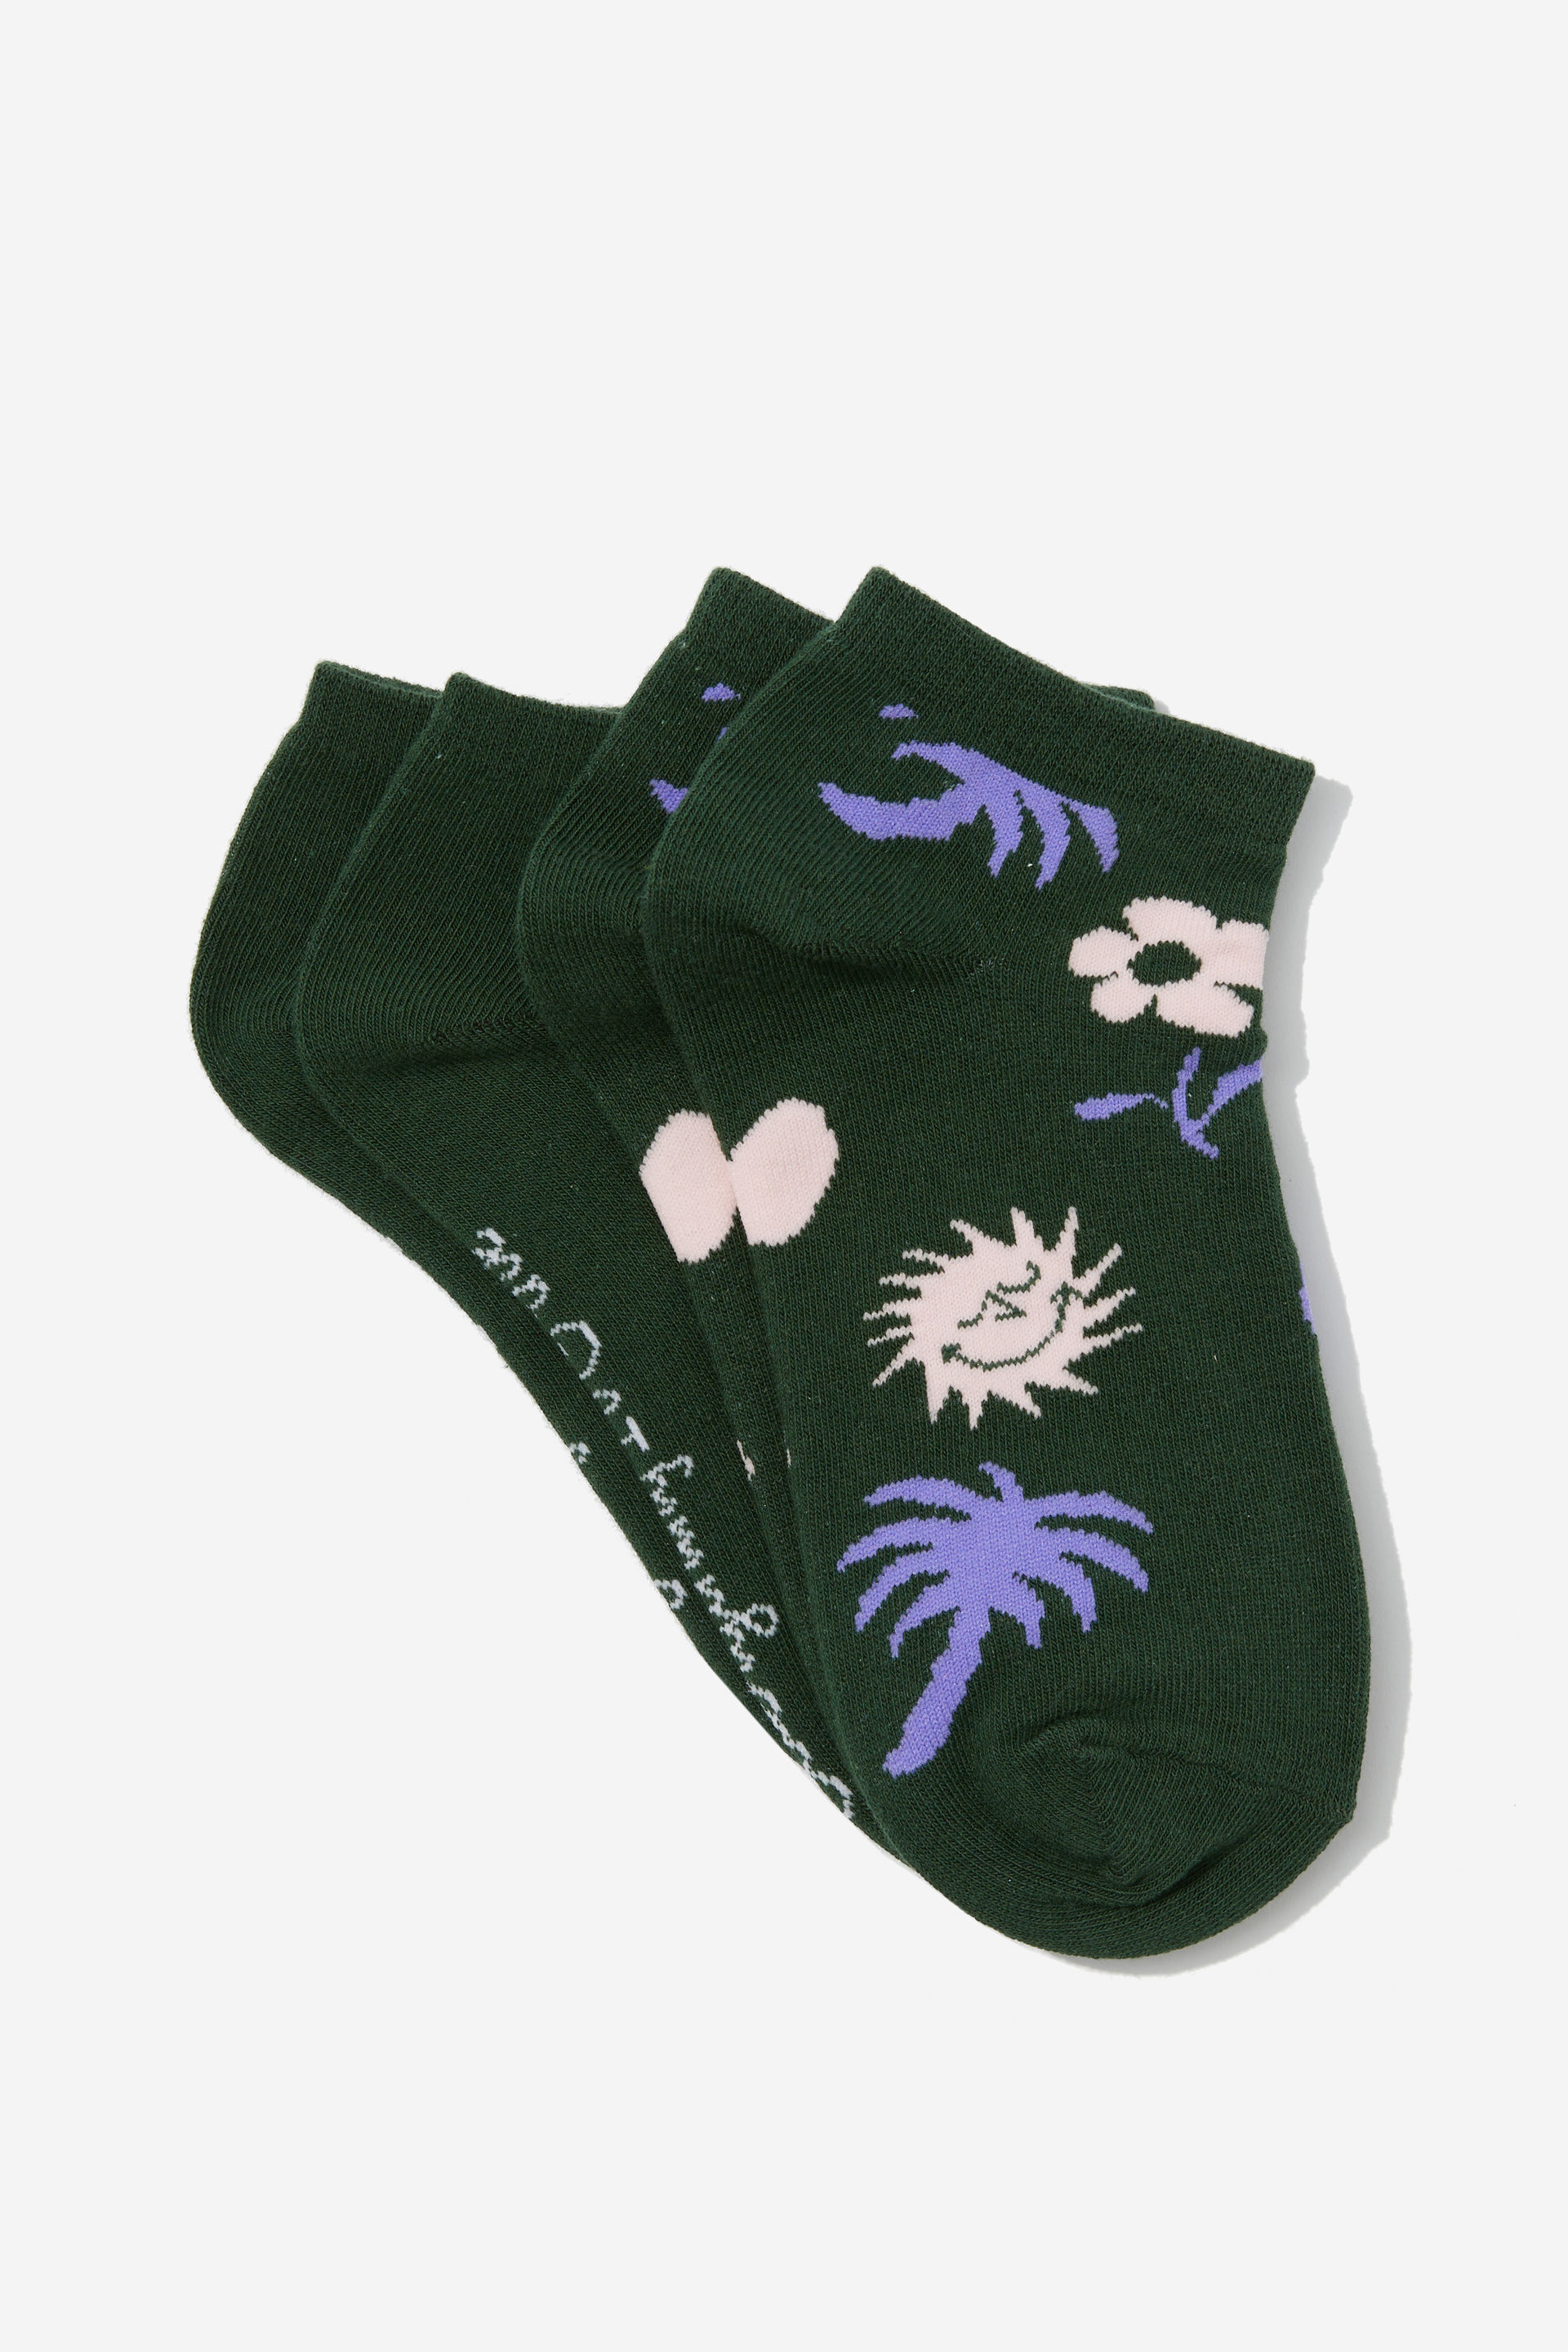 Typo - 2 Pk Of Ankle Socks - Just good vibes (s/m)